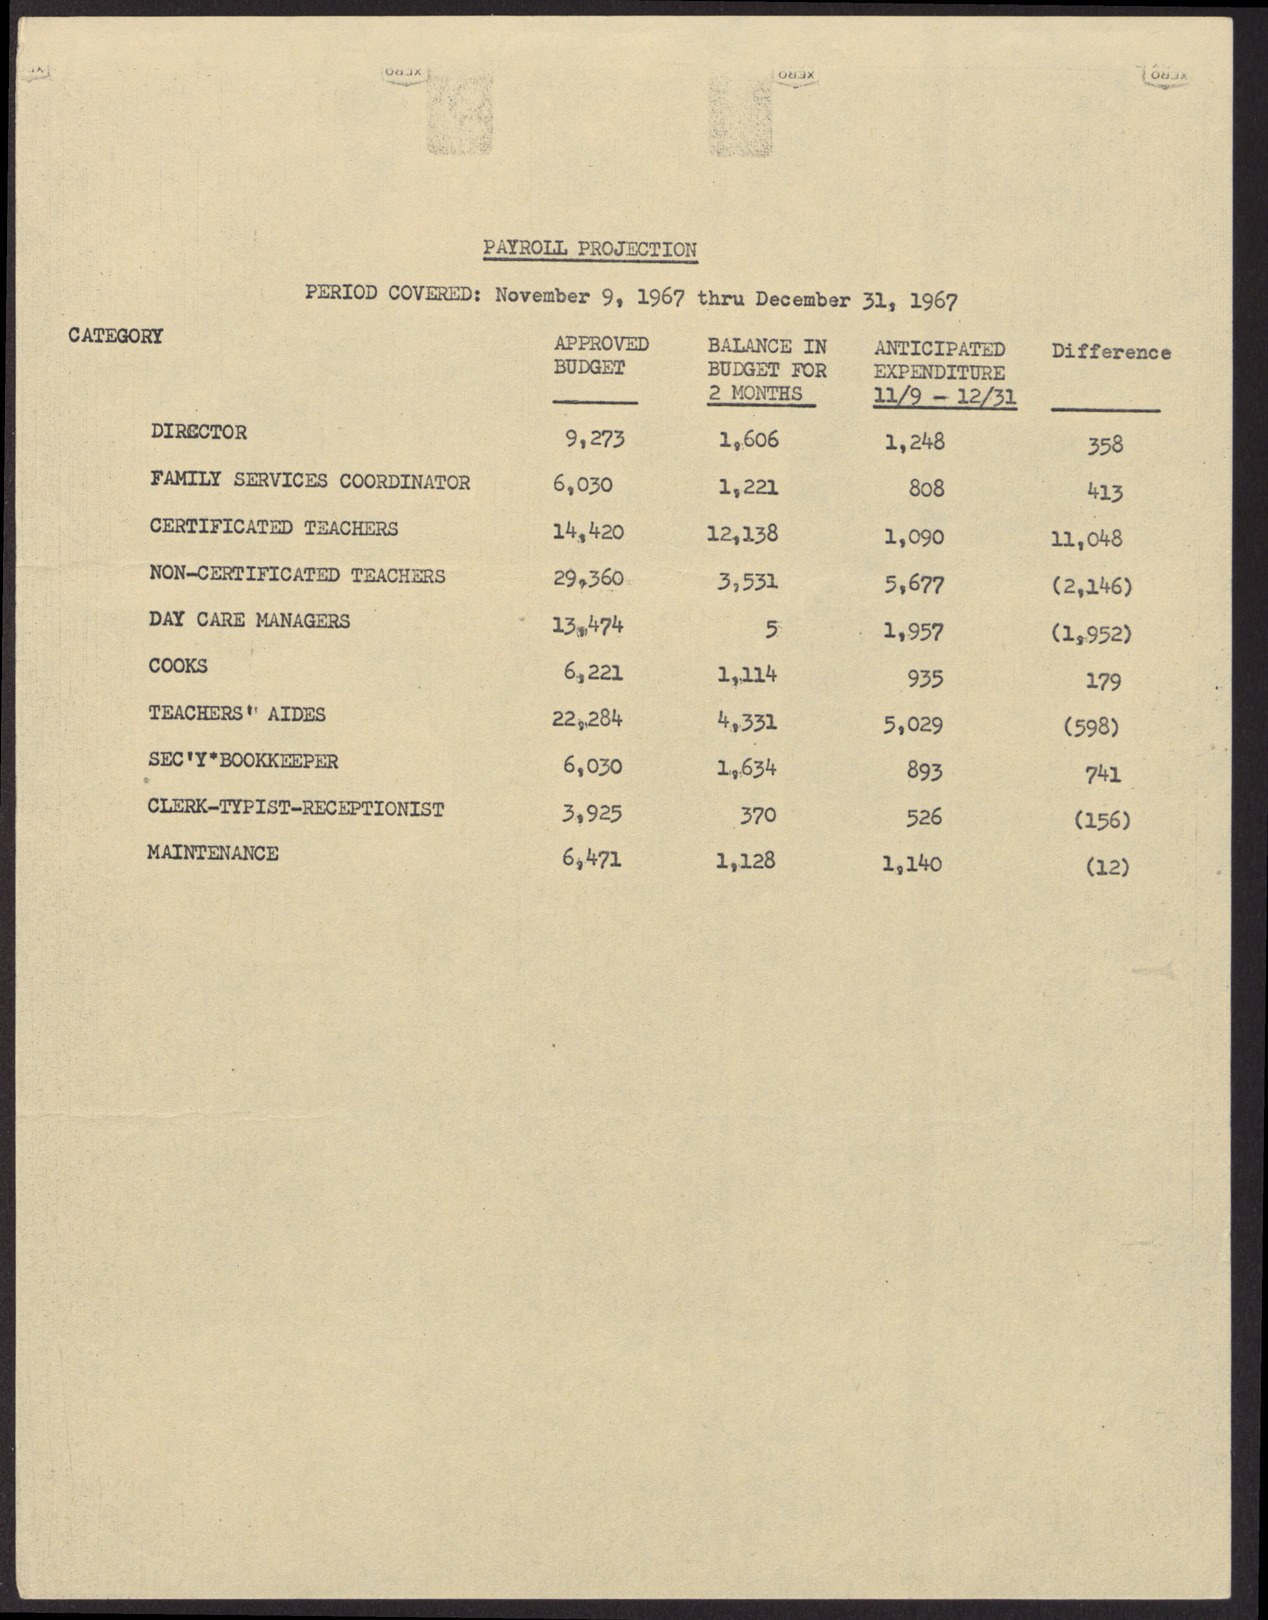 Operation Independence Inc. Payroll Projection, November 9, 1967 to December 31, 1967